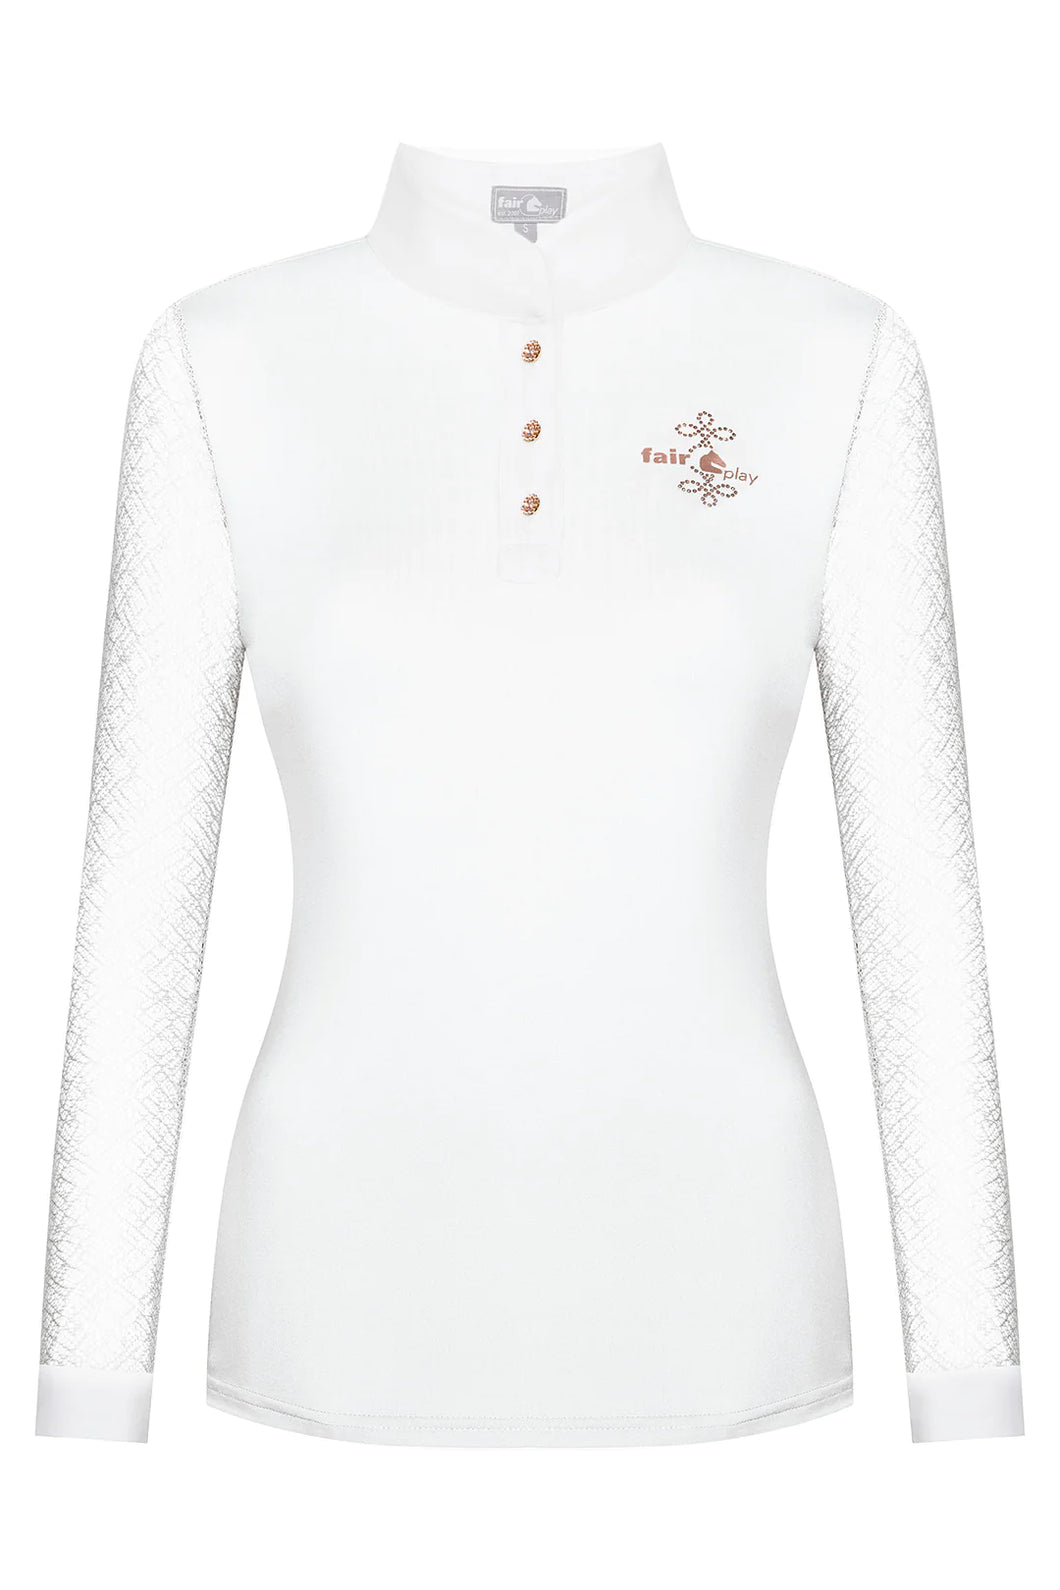 Fair Play Cecile Long Sleeve Competition Shirt